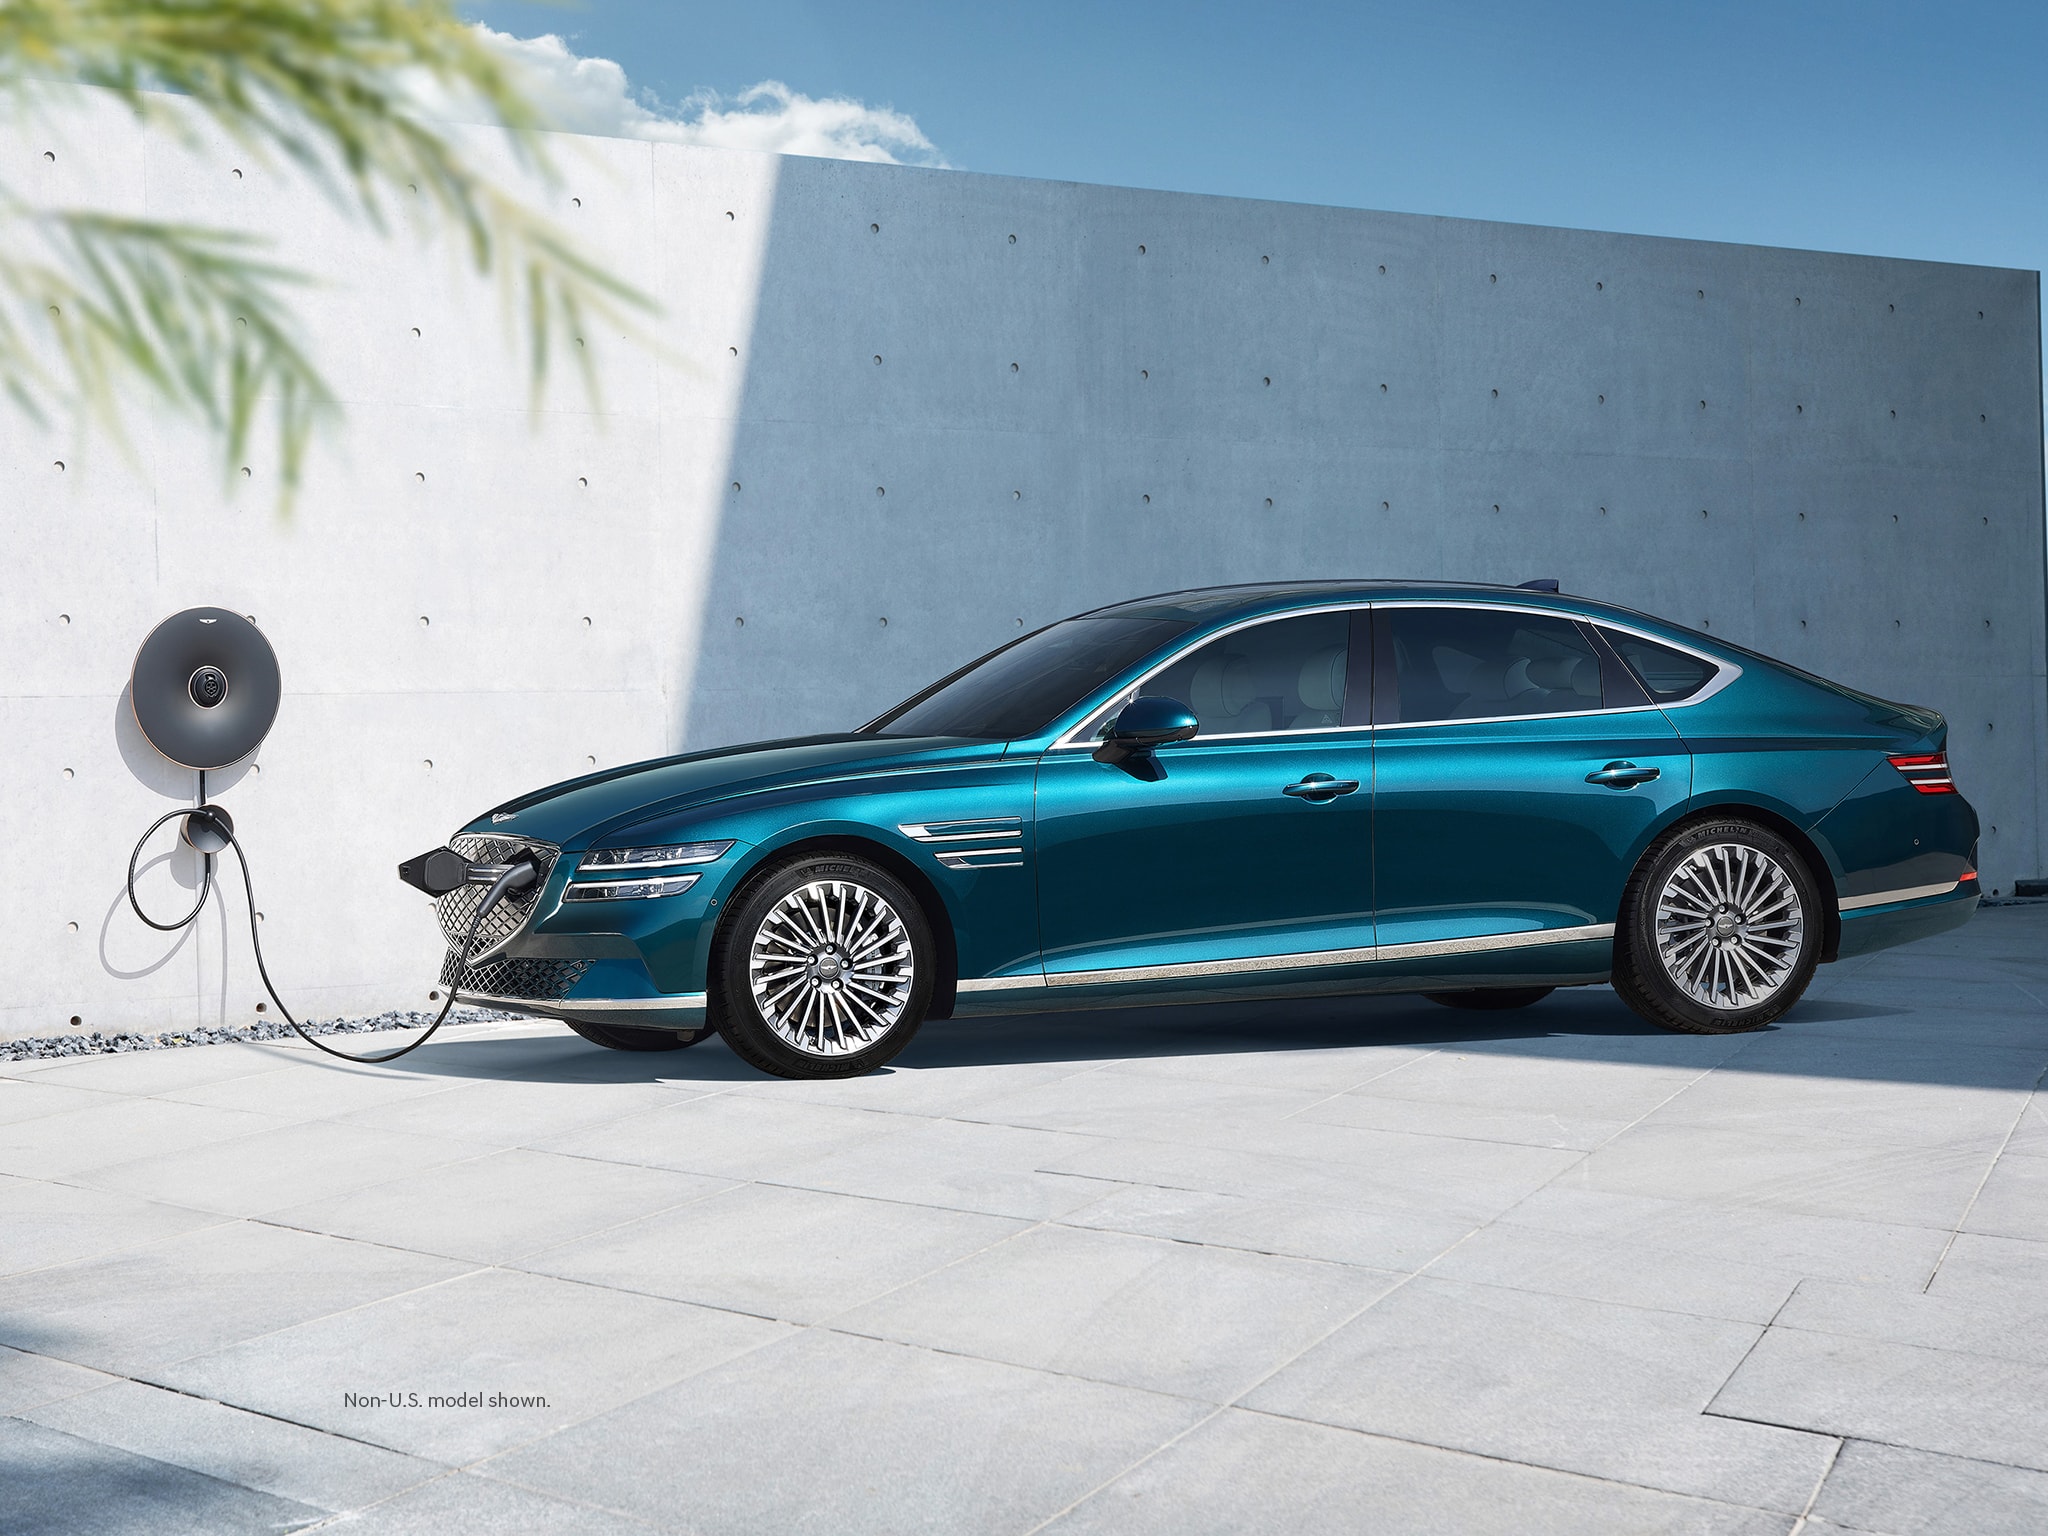 2023 Electrified G80 exterior shown in Matira Blue charging